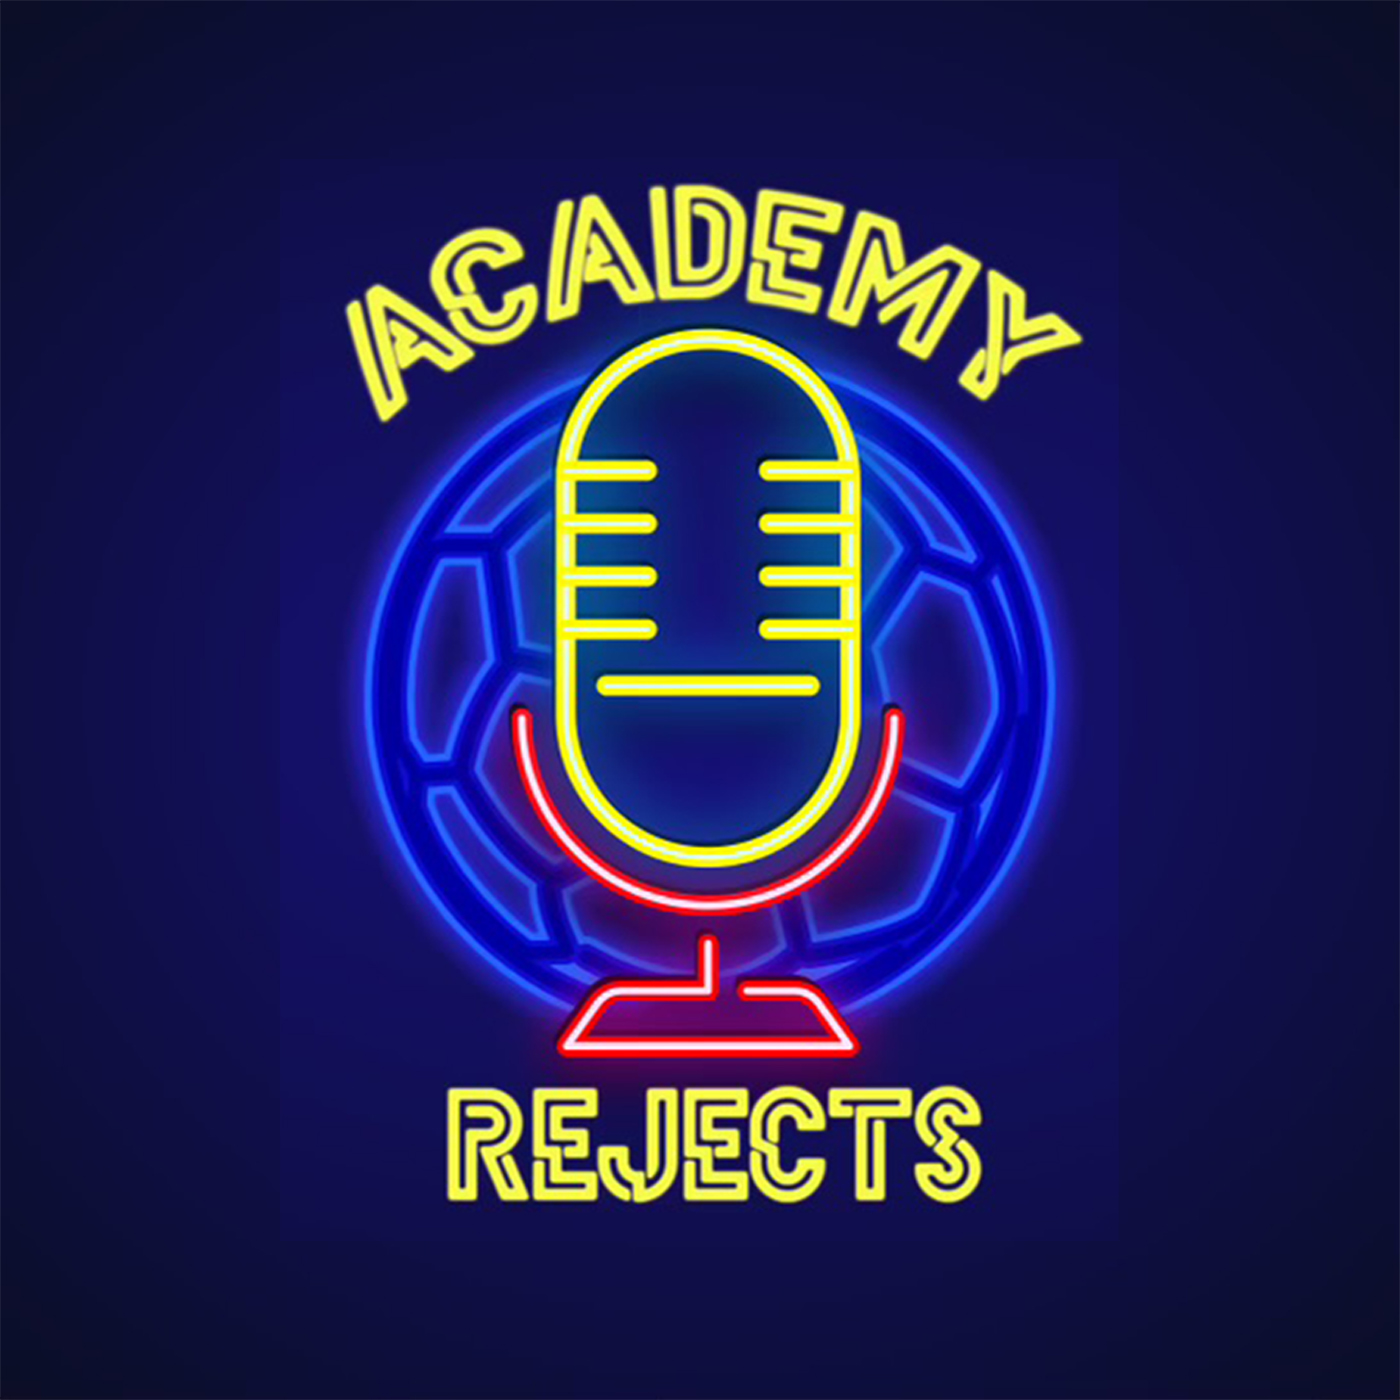 Academy rejects: episode 12